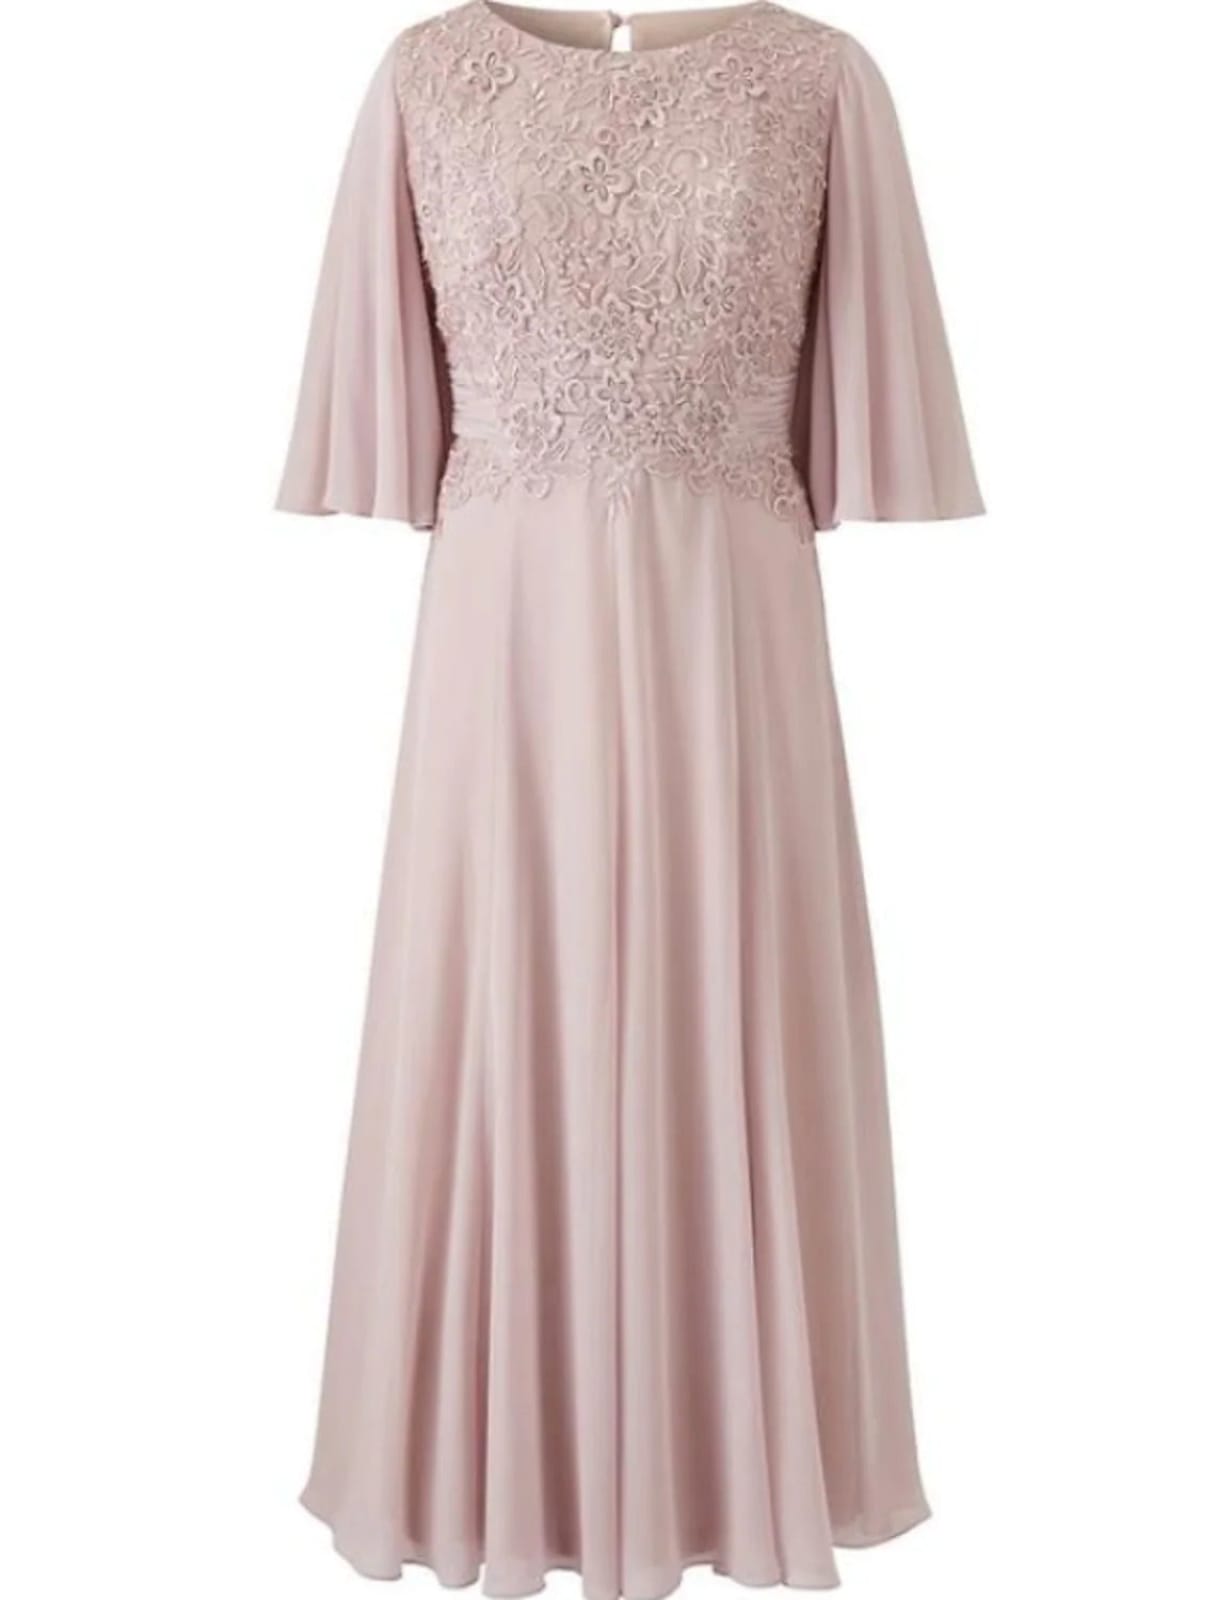 A-line Ankle Length Scoop Chiffon Butterfly Sleeve Mother of Bride Dress, Embroidery